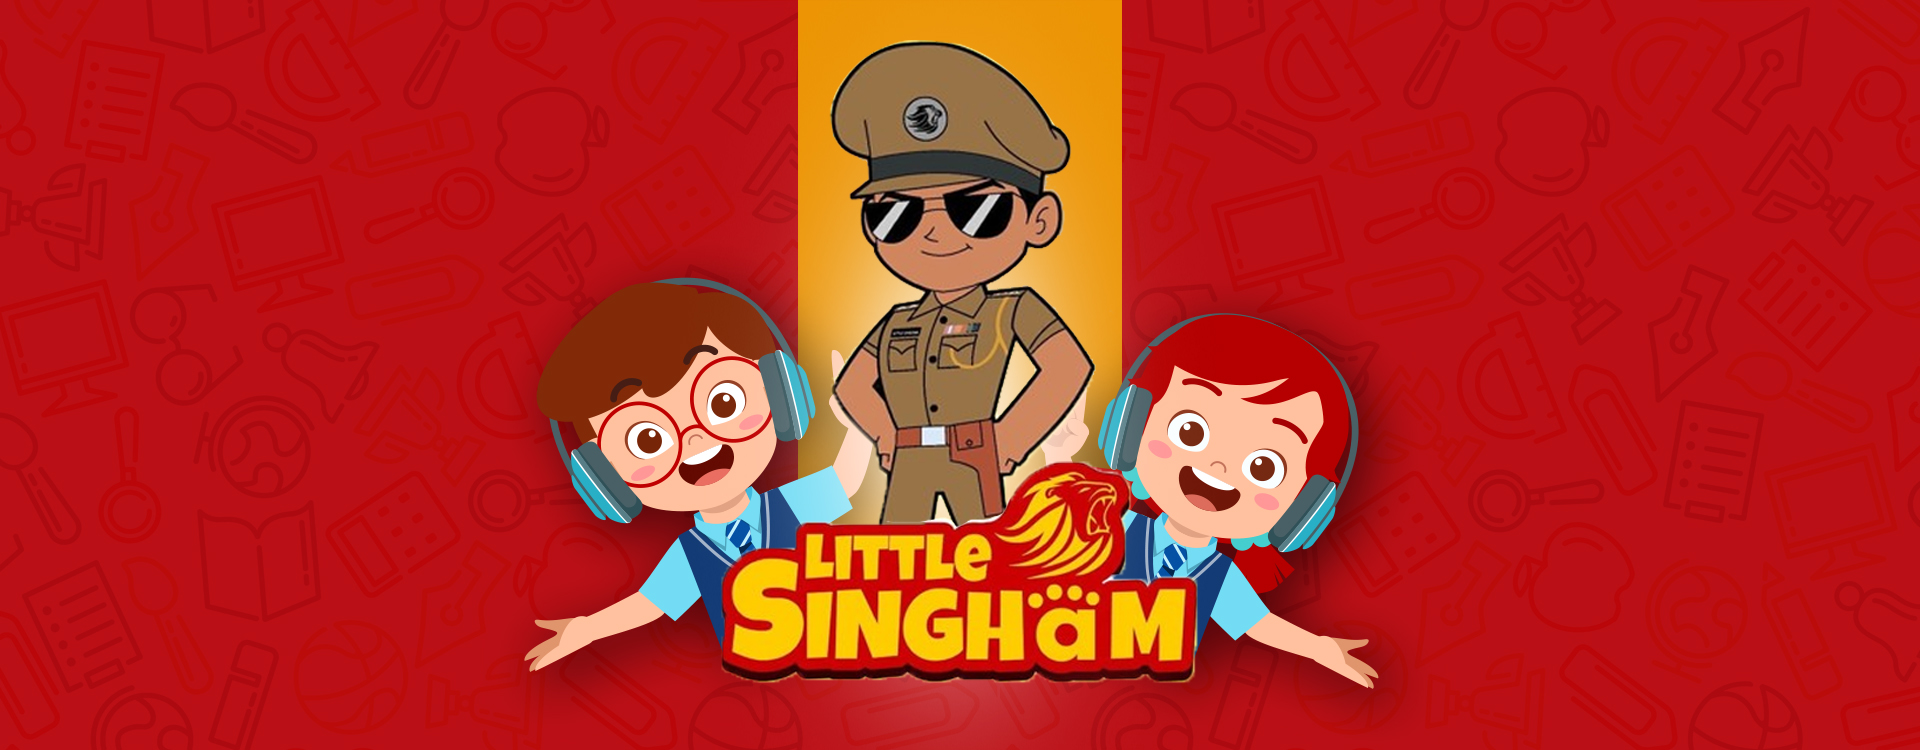 Little Singham: Creating an Immersive Learning Experience for Children